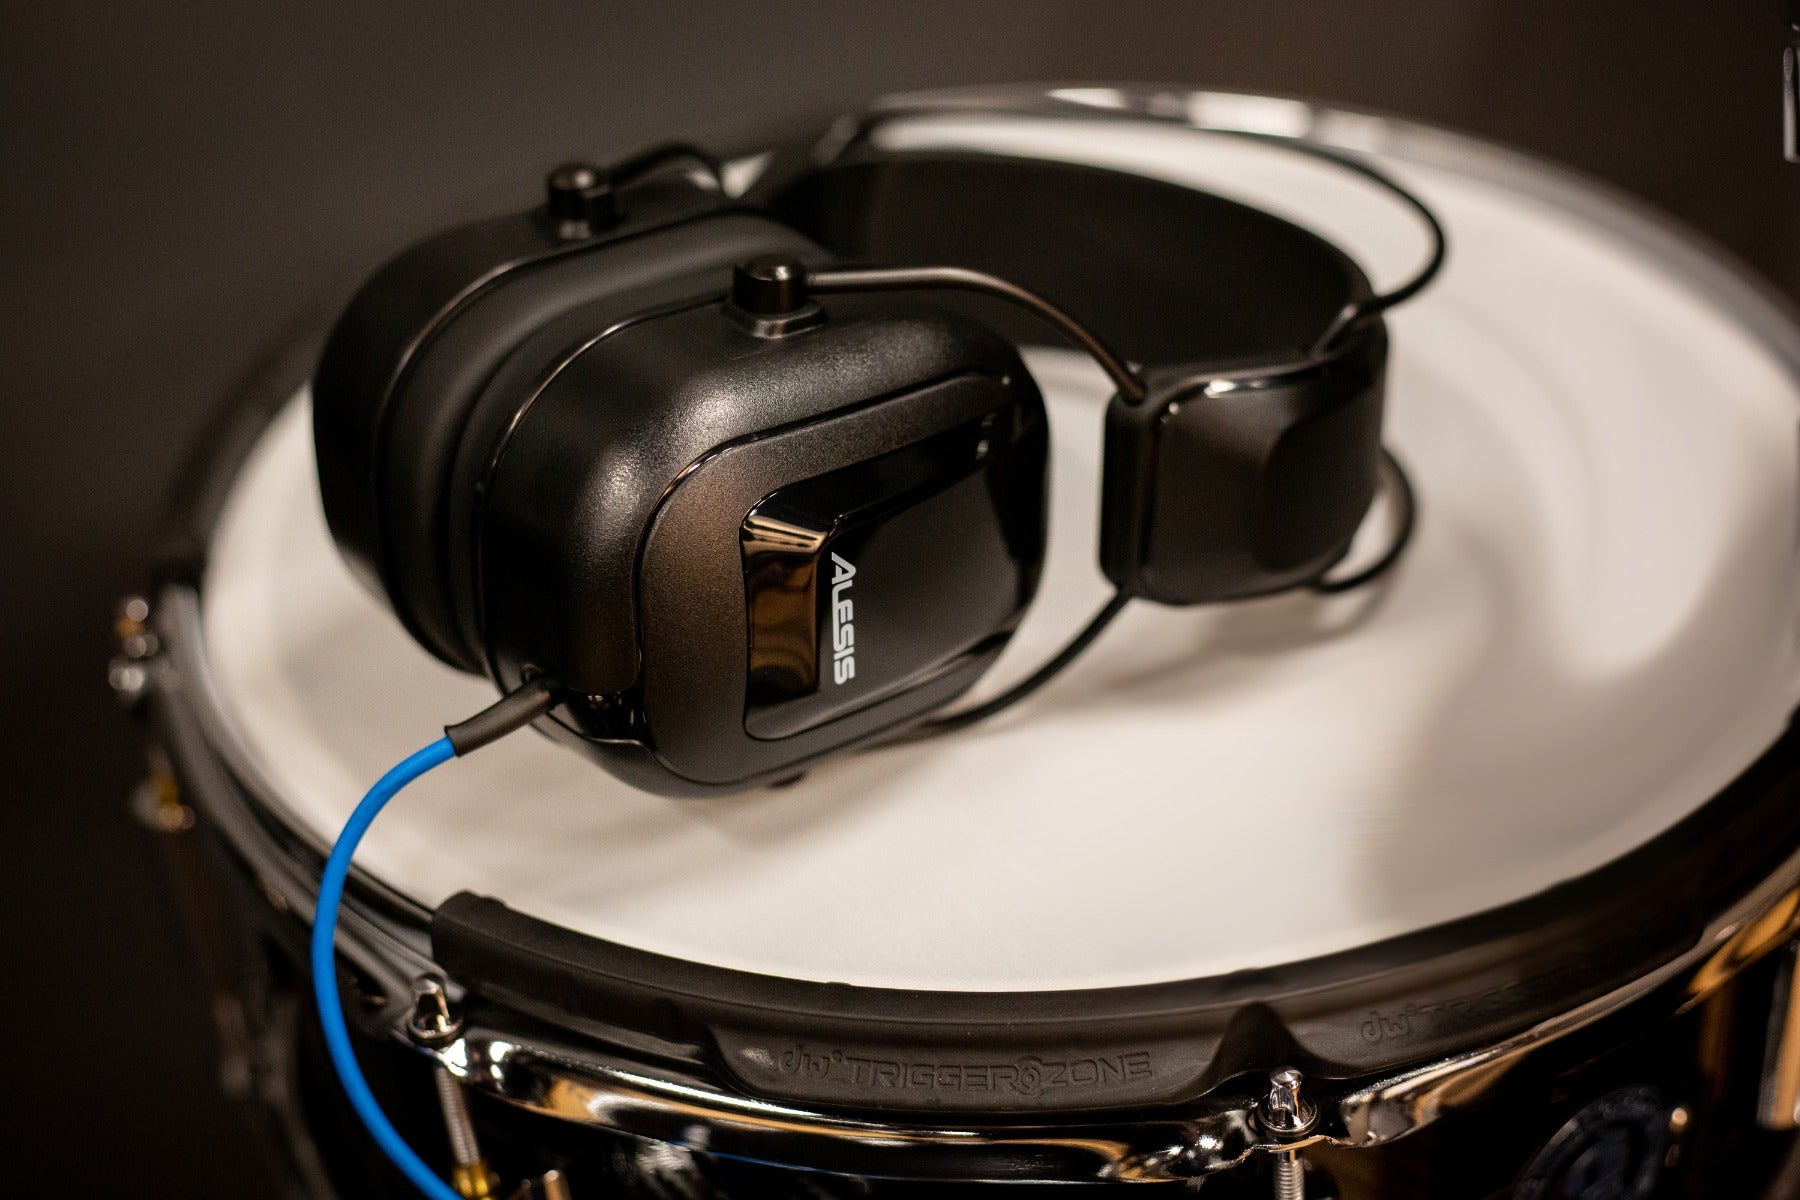 View of the Alesis DRP100 Electronic Drum Reference Headphones laying on their side on the head of an electronic snare drum